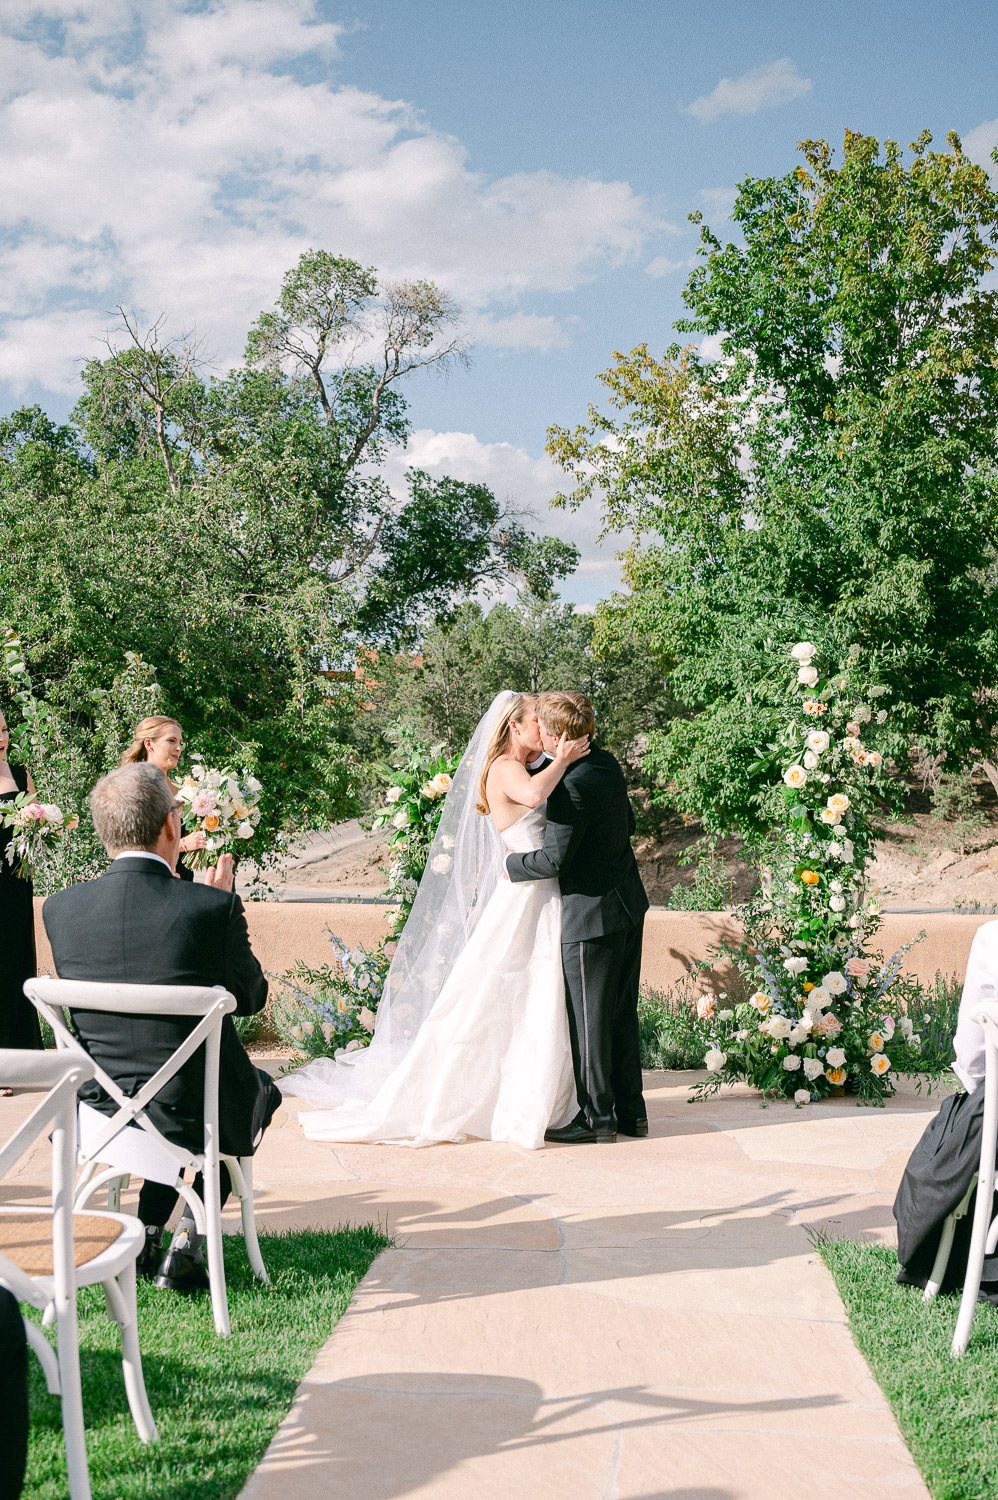 Bride and Groom kiss in front of a flower altar during an outdoor wedding ceremony.